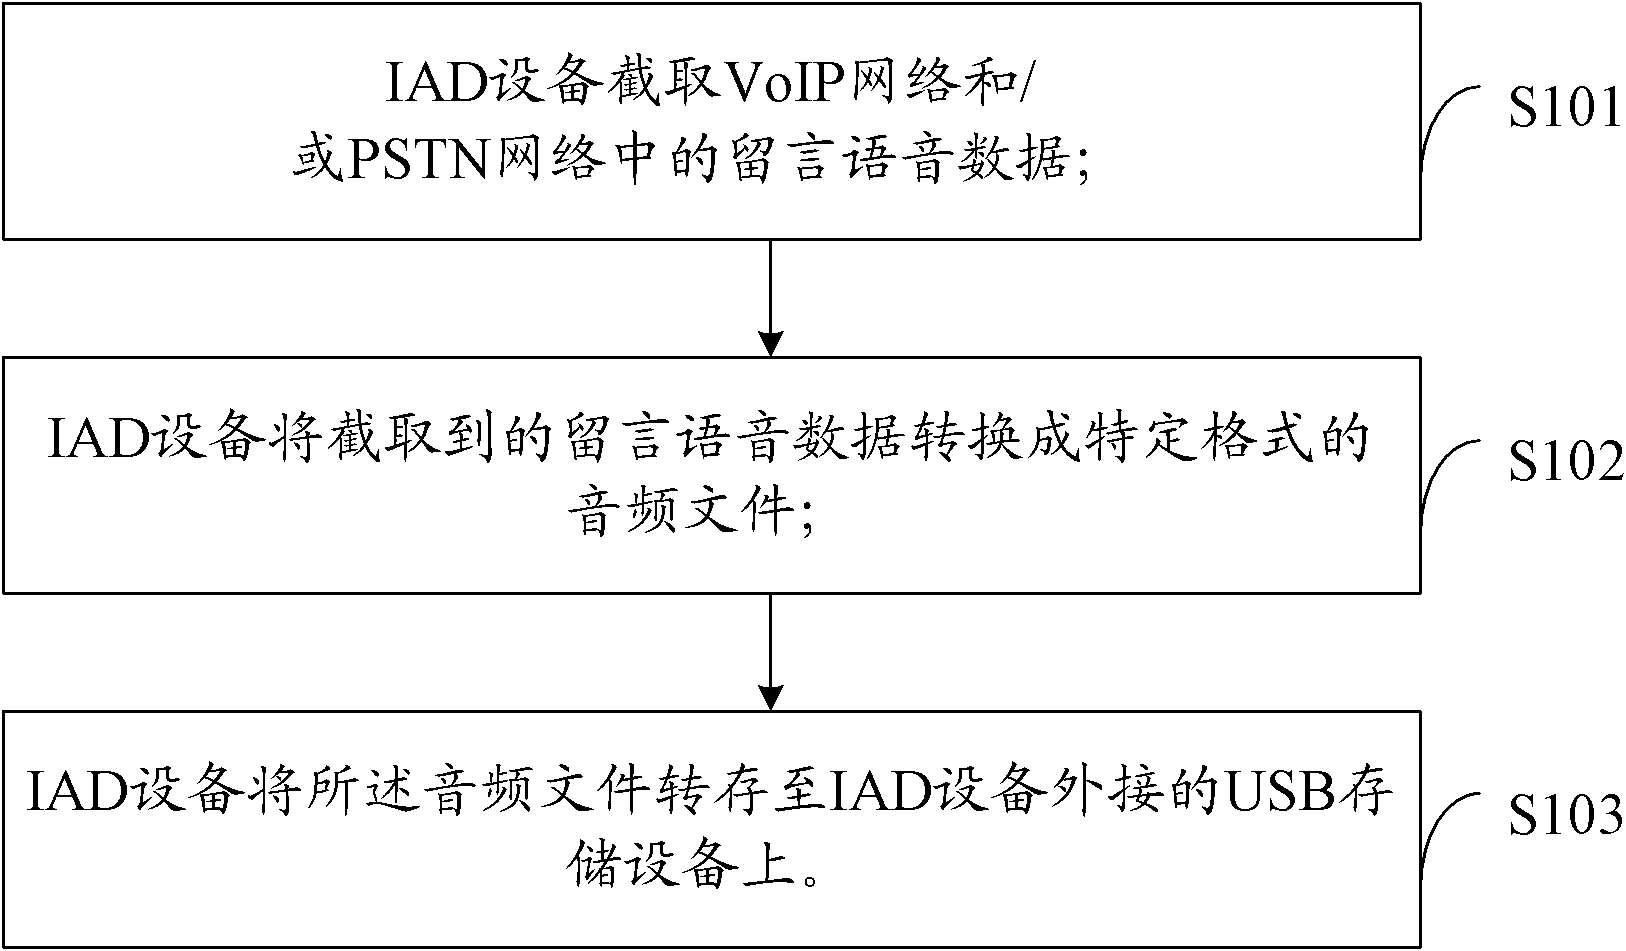 IAD (Integrated Access Device) and voice processing method and system based on same